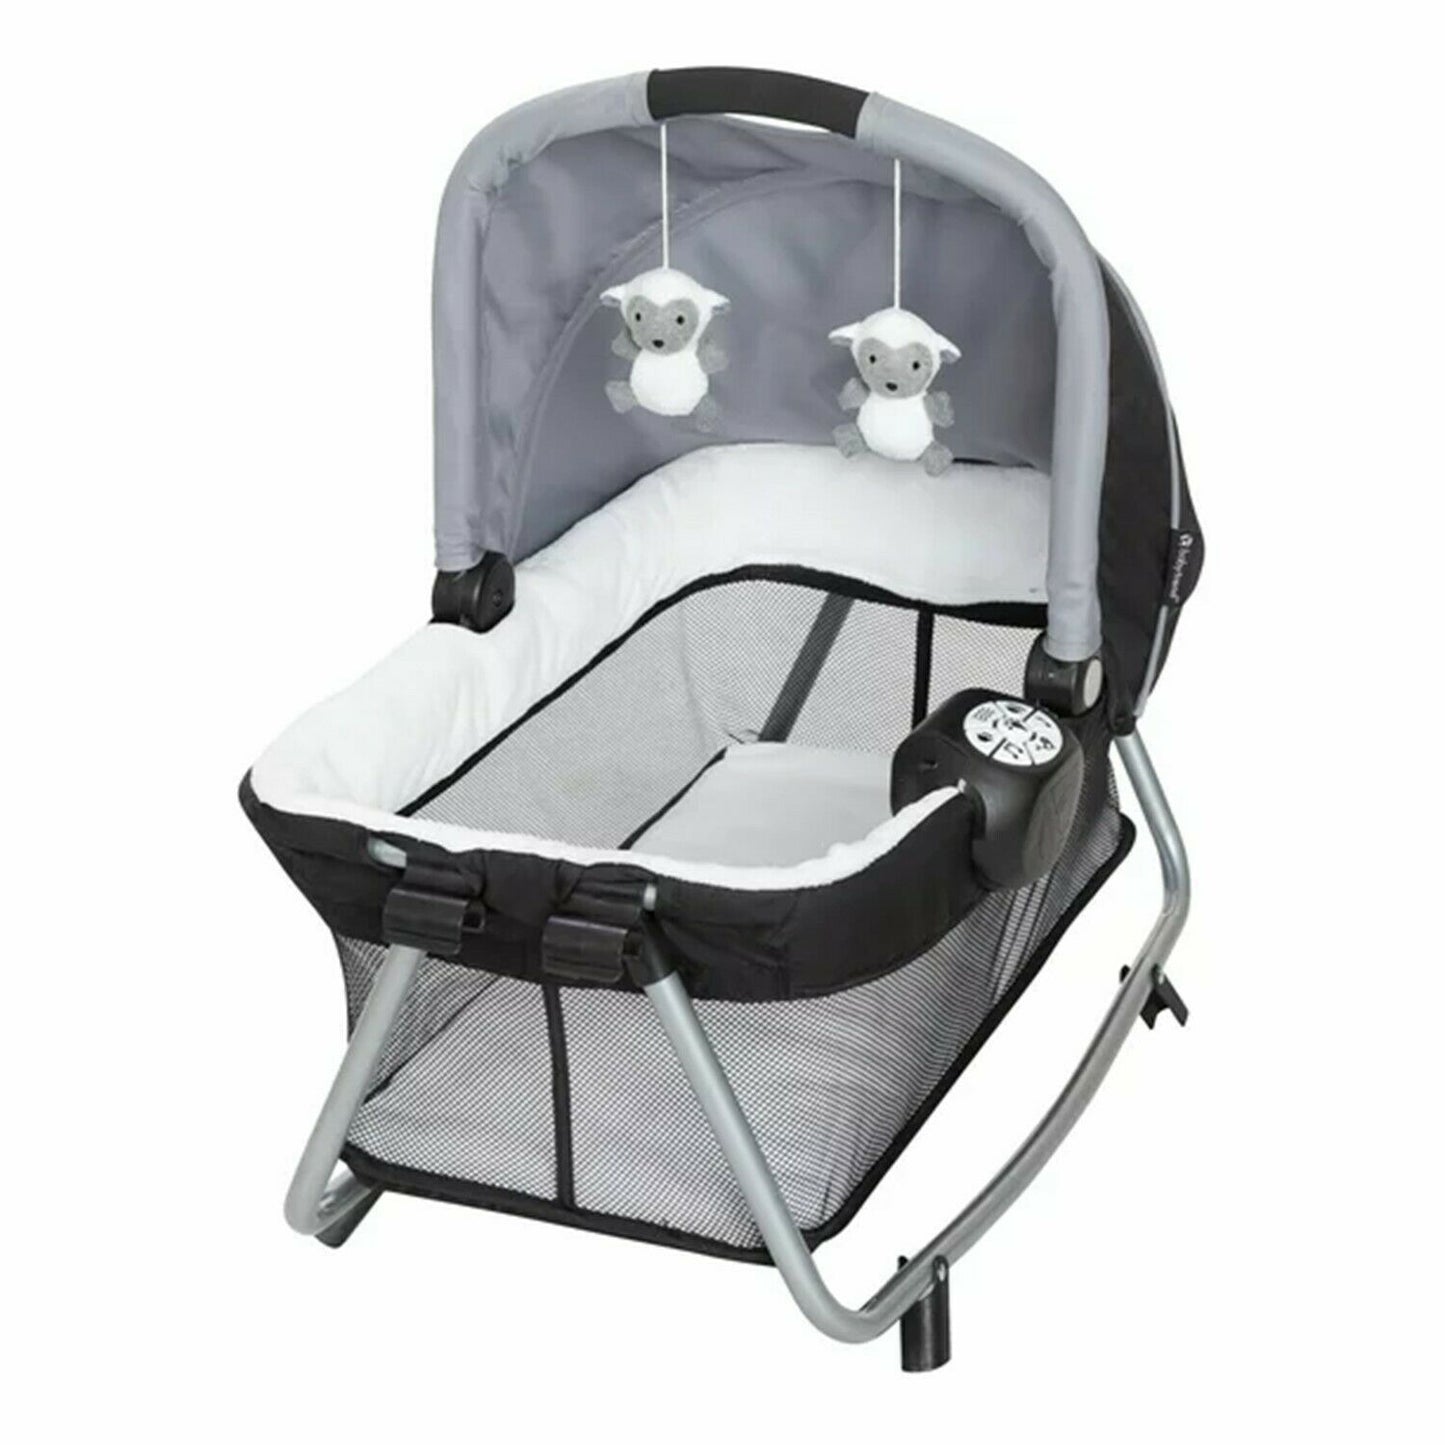 Baby Stroller with Car Seat Travel System Playard Basinet Diaper Bag Combo New